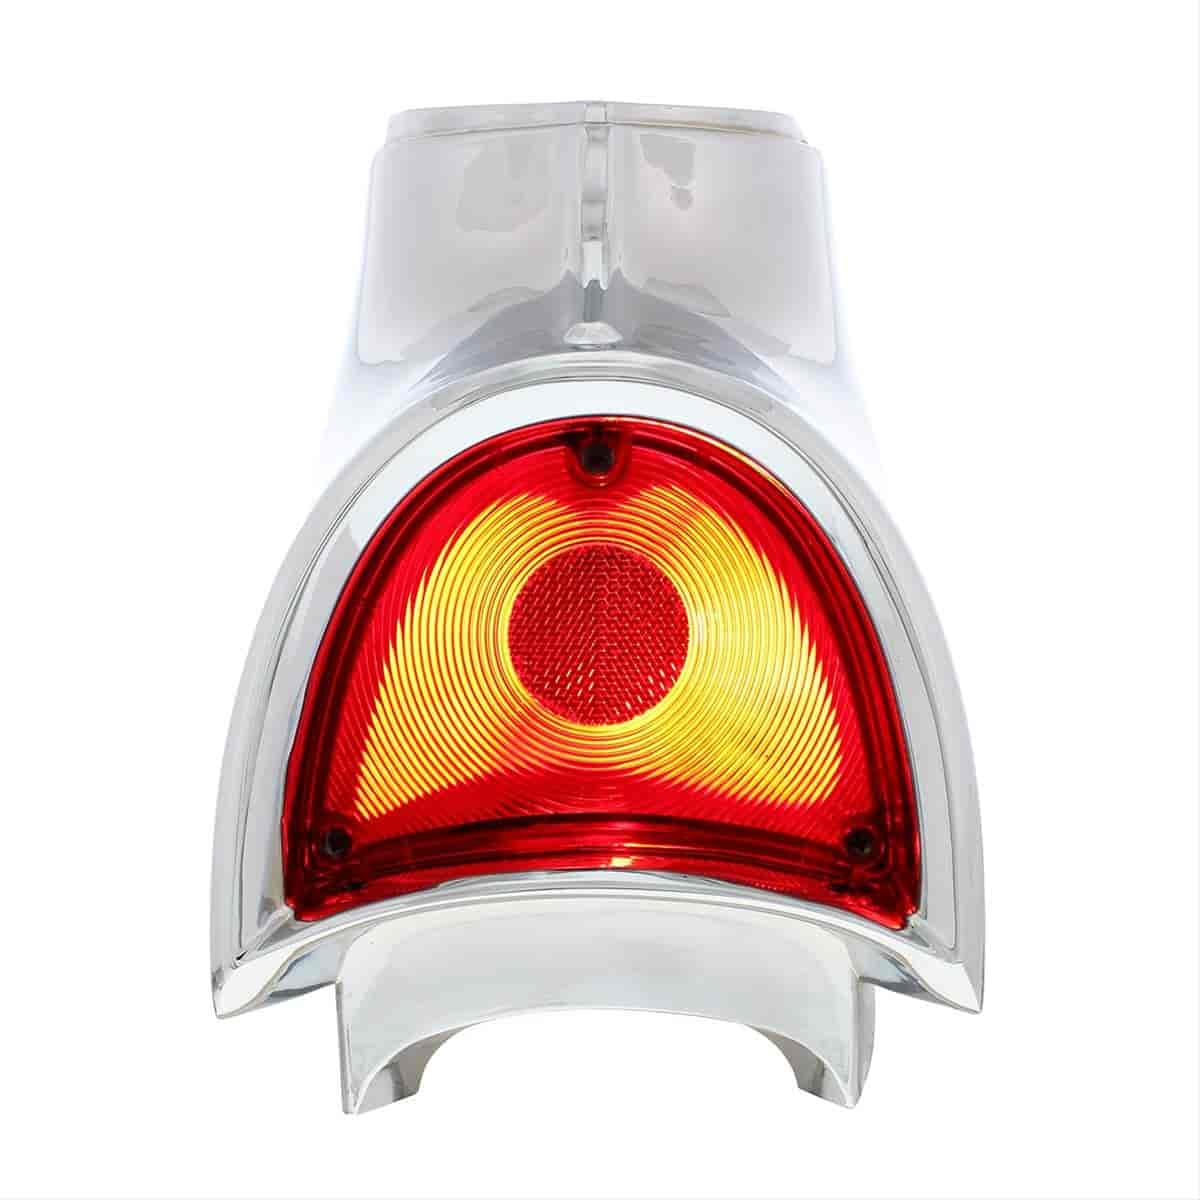 110183 Tail Light for 1957 CHEVY BEL AIR